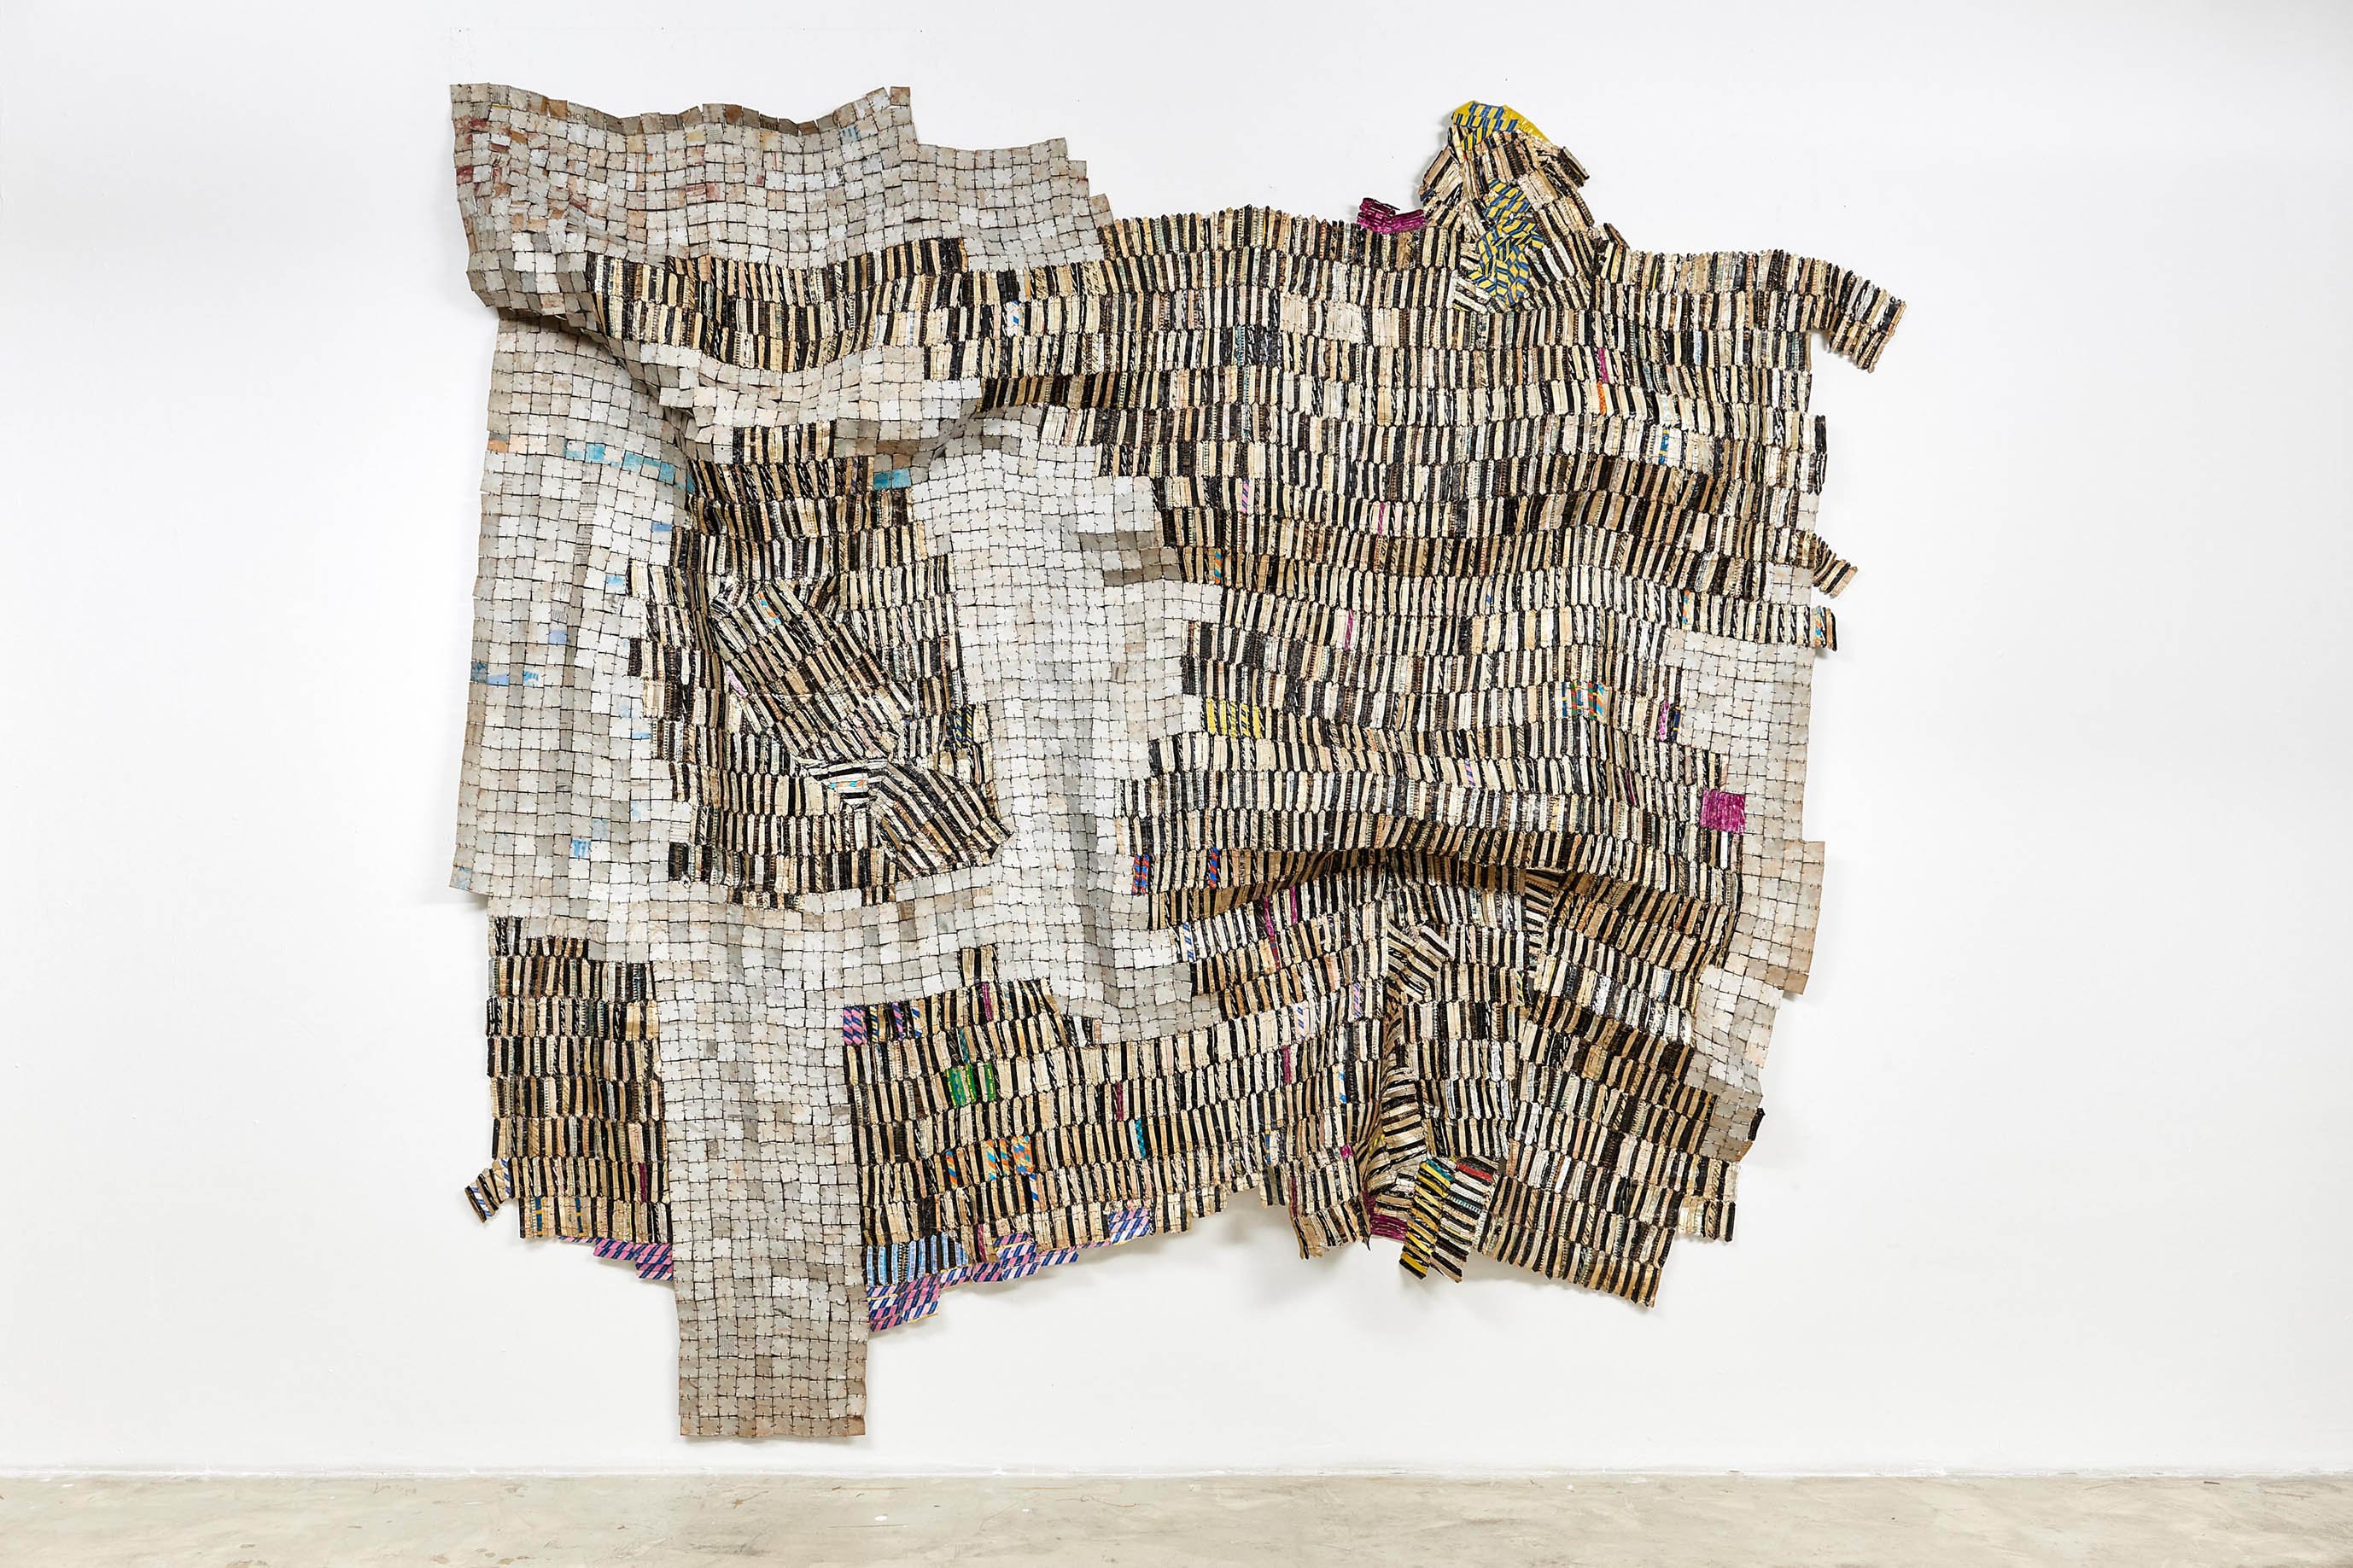 El Anatsui comes back to Africa - The Mail & Guardian